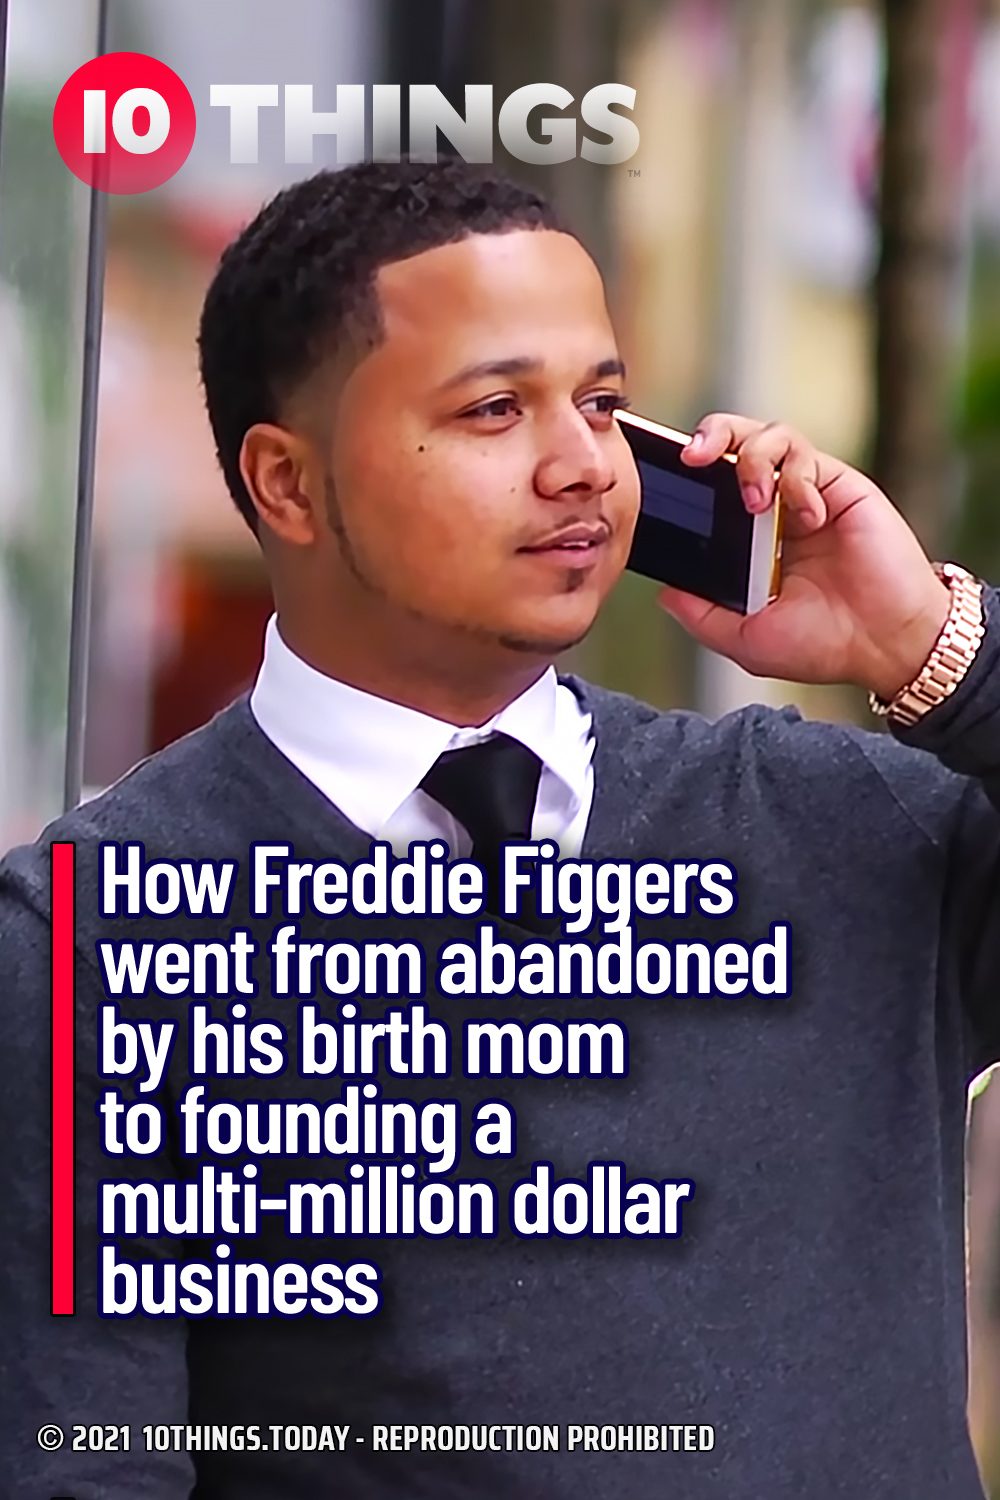 How Freddie Figgers went from abandoned by his birth mom to founding a multi-million dollar business